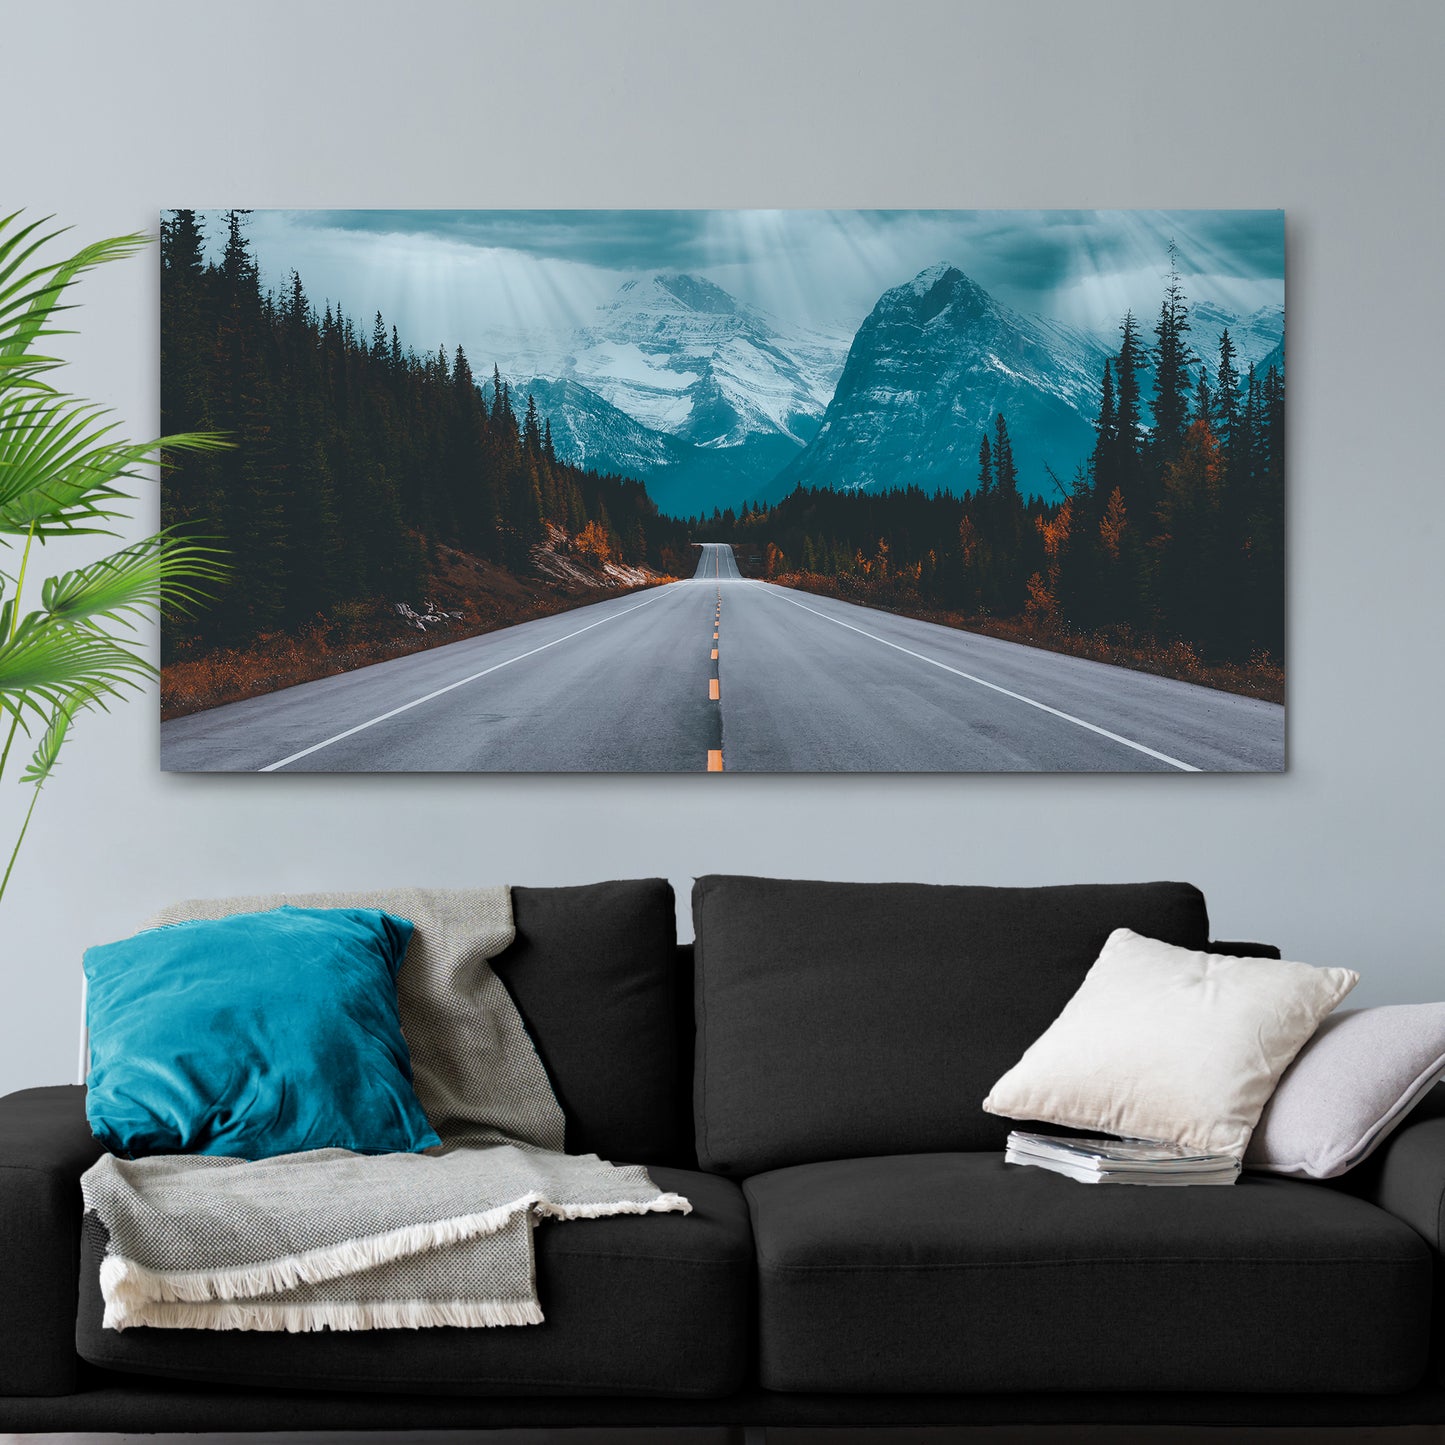 Middle Road To Snowy Mountain Canvas Wall Art - Image by Tailored Canvases